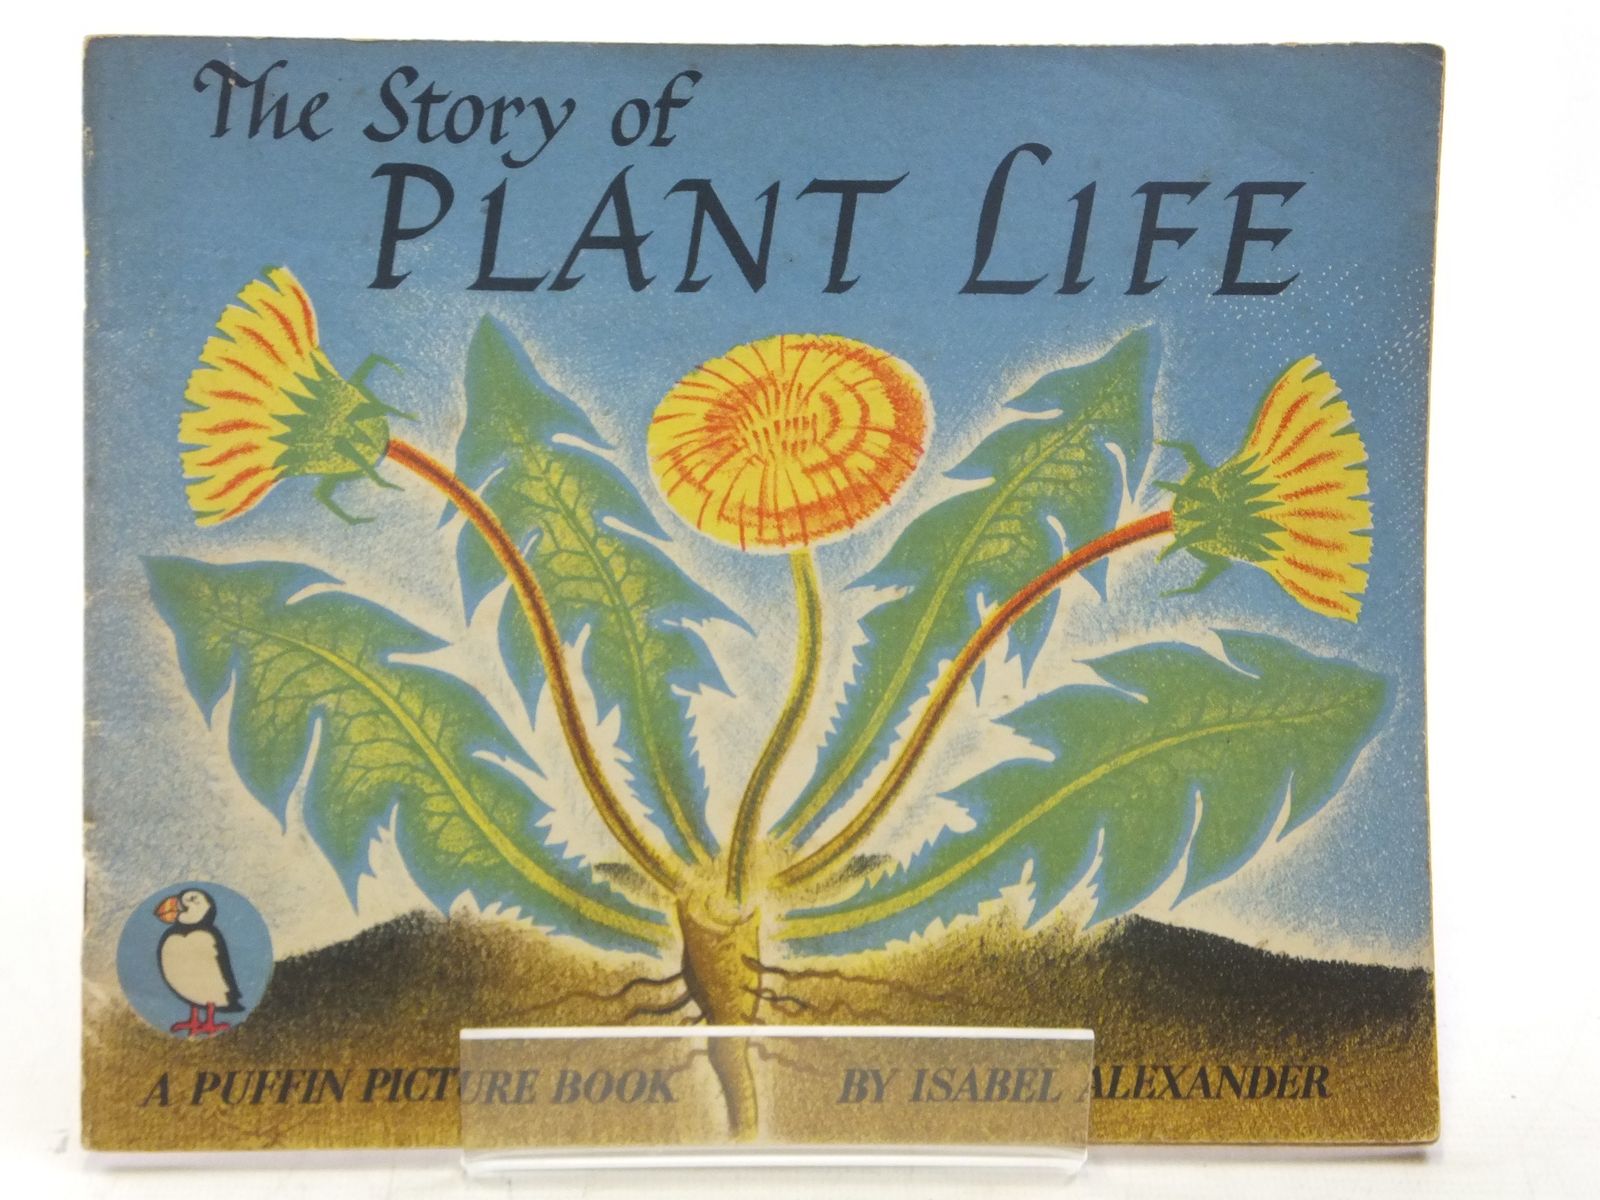 Puffin books. The Secret Life of Plants. [1979] Journey through the Secret Life of Plants. Flower stories. Plants story